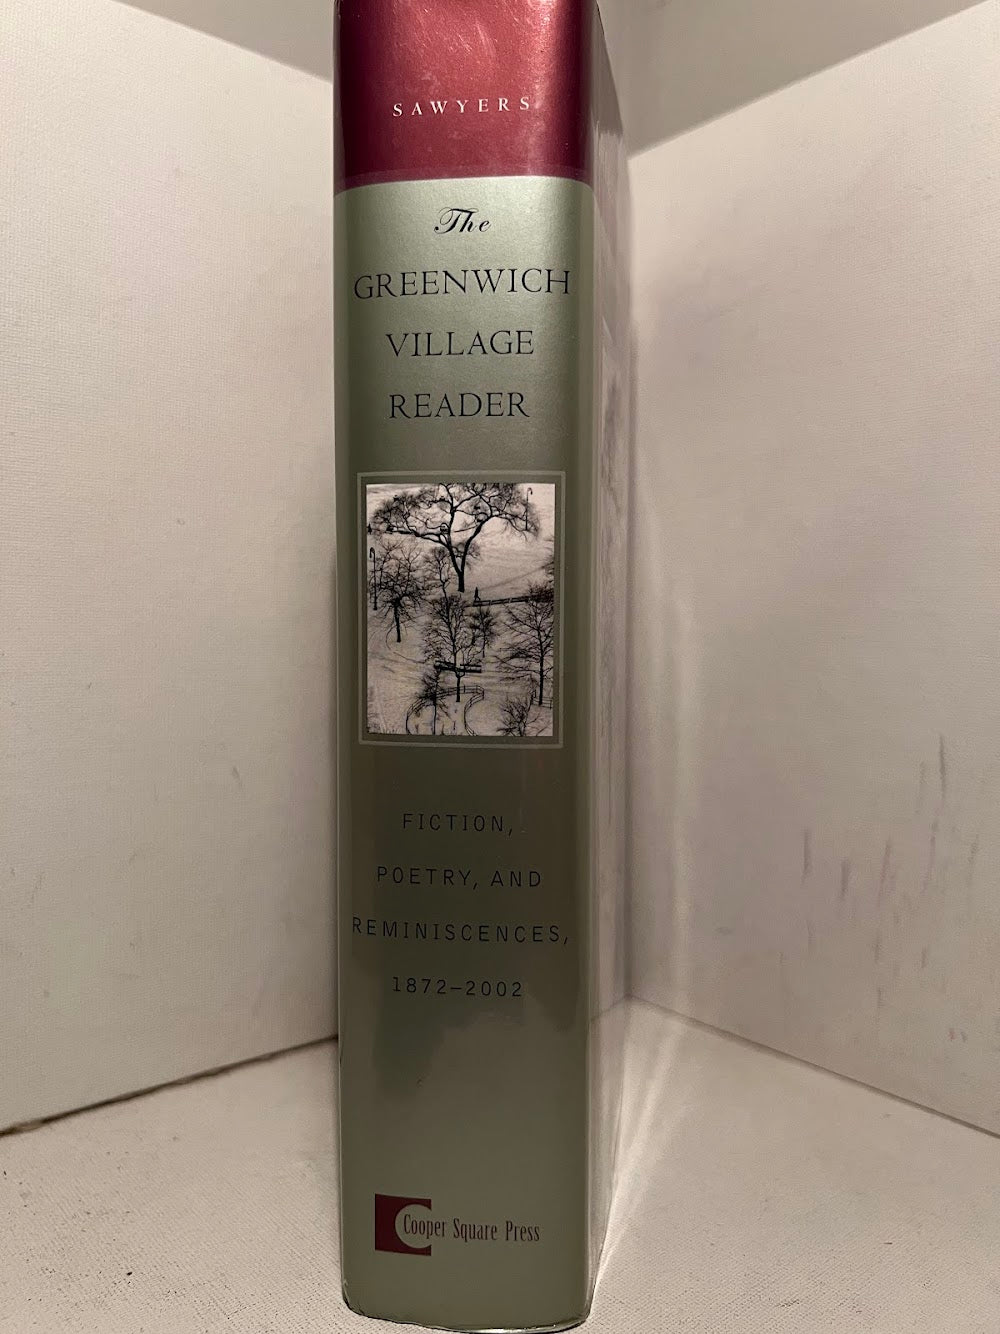 The Greenwich Village Reader (Fiction, Poetry, and Reminiscences 1872-2002) edited by June Skinner Sawyers